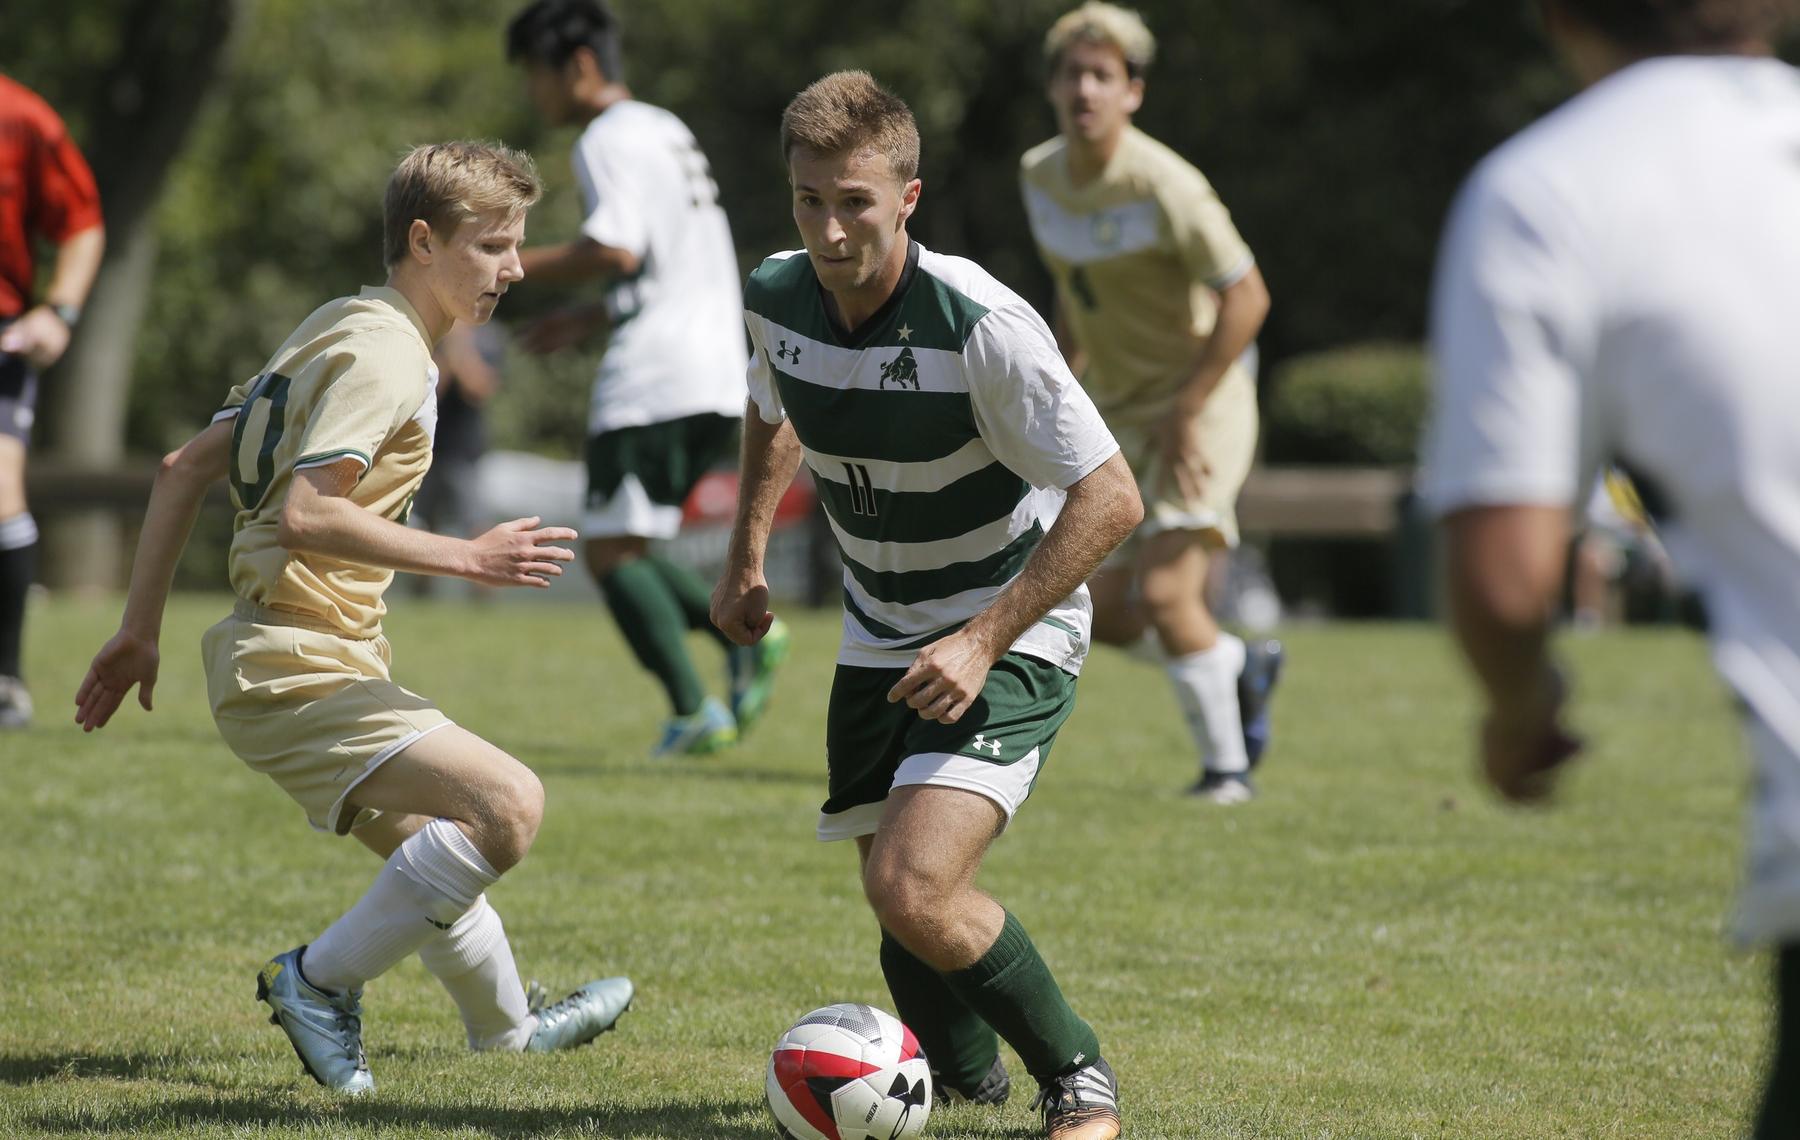 Men's Soccer opens Williams Classic with win over Franciscan, 2-0